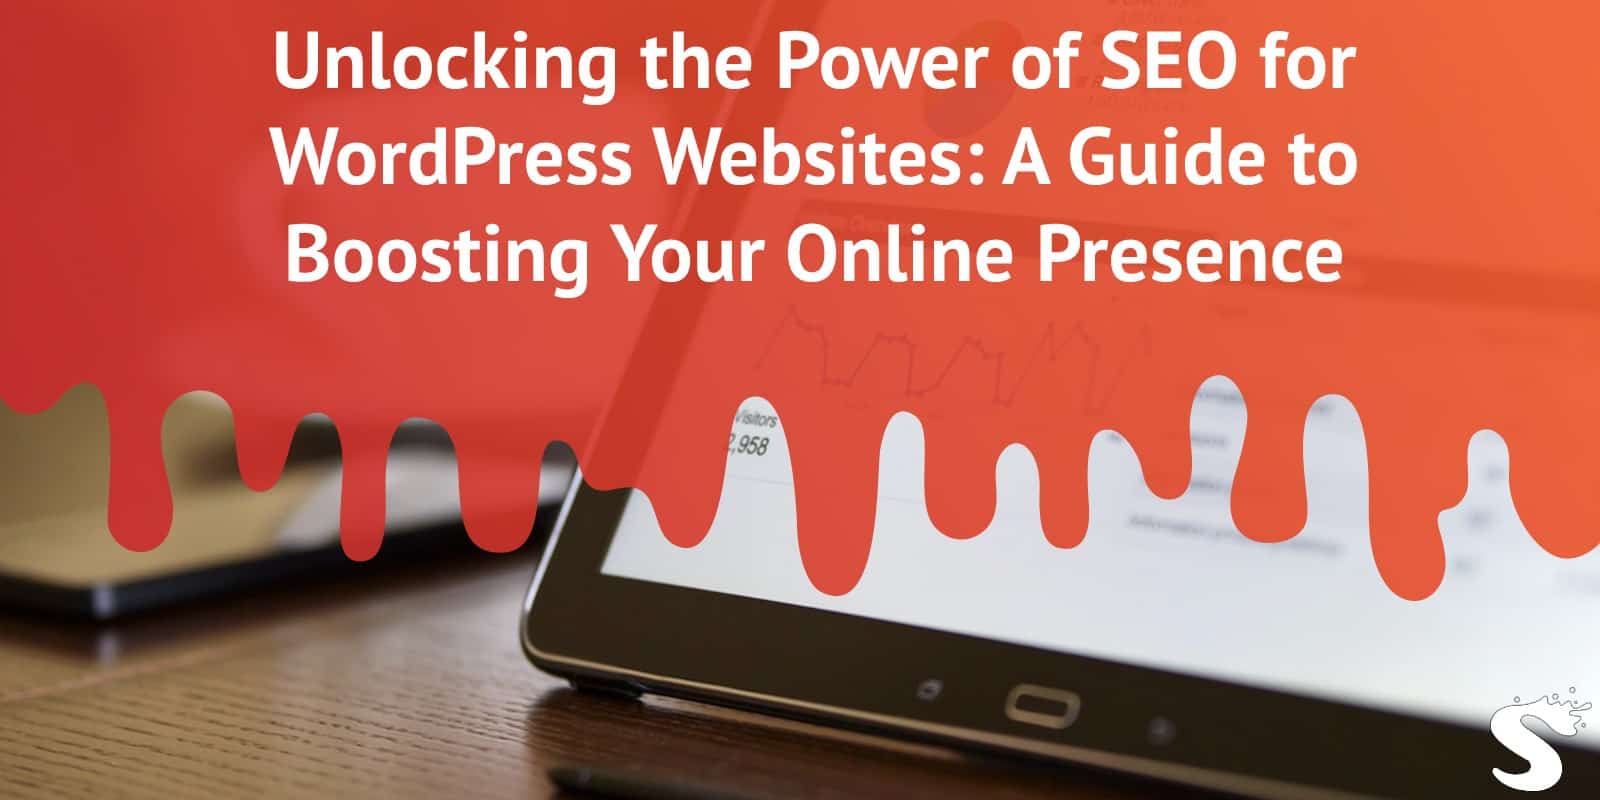 Unlocking the Power of SEO for WordPress Websites: A Guide to Boosting Your Online Presence